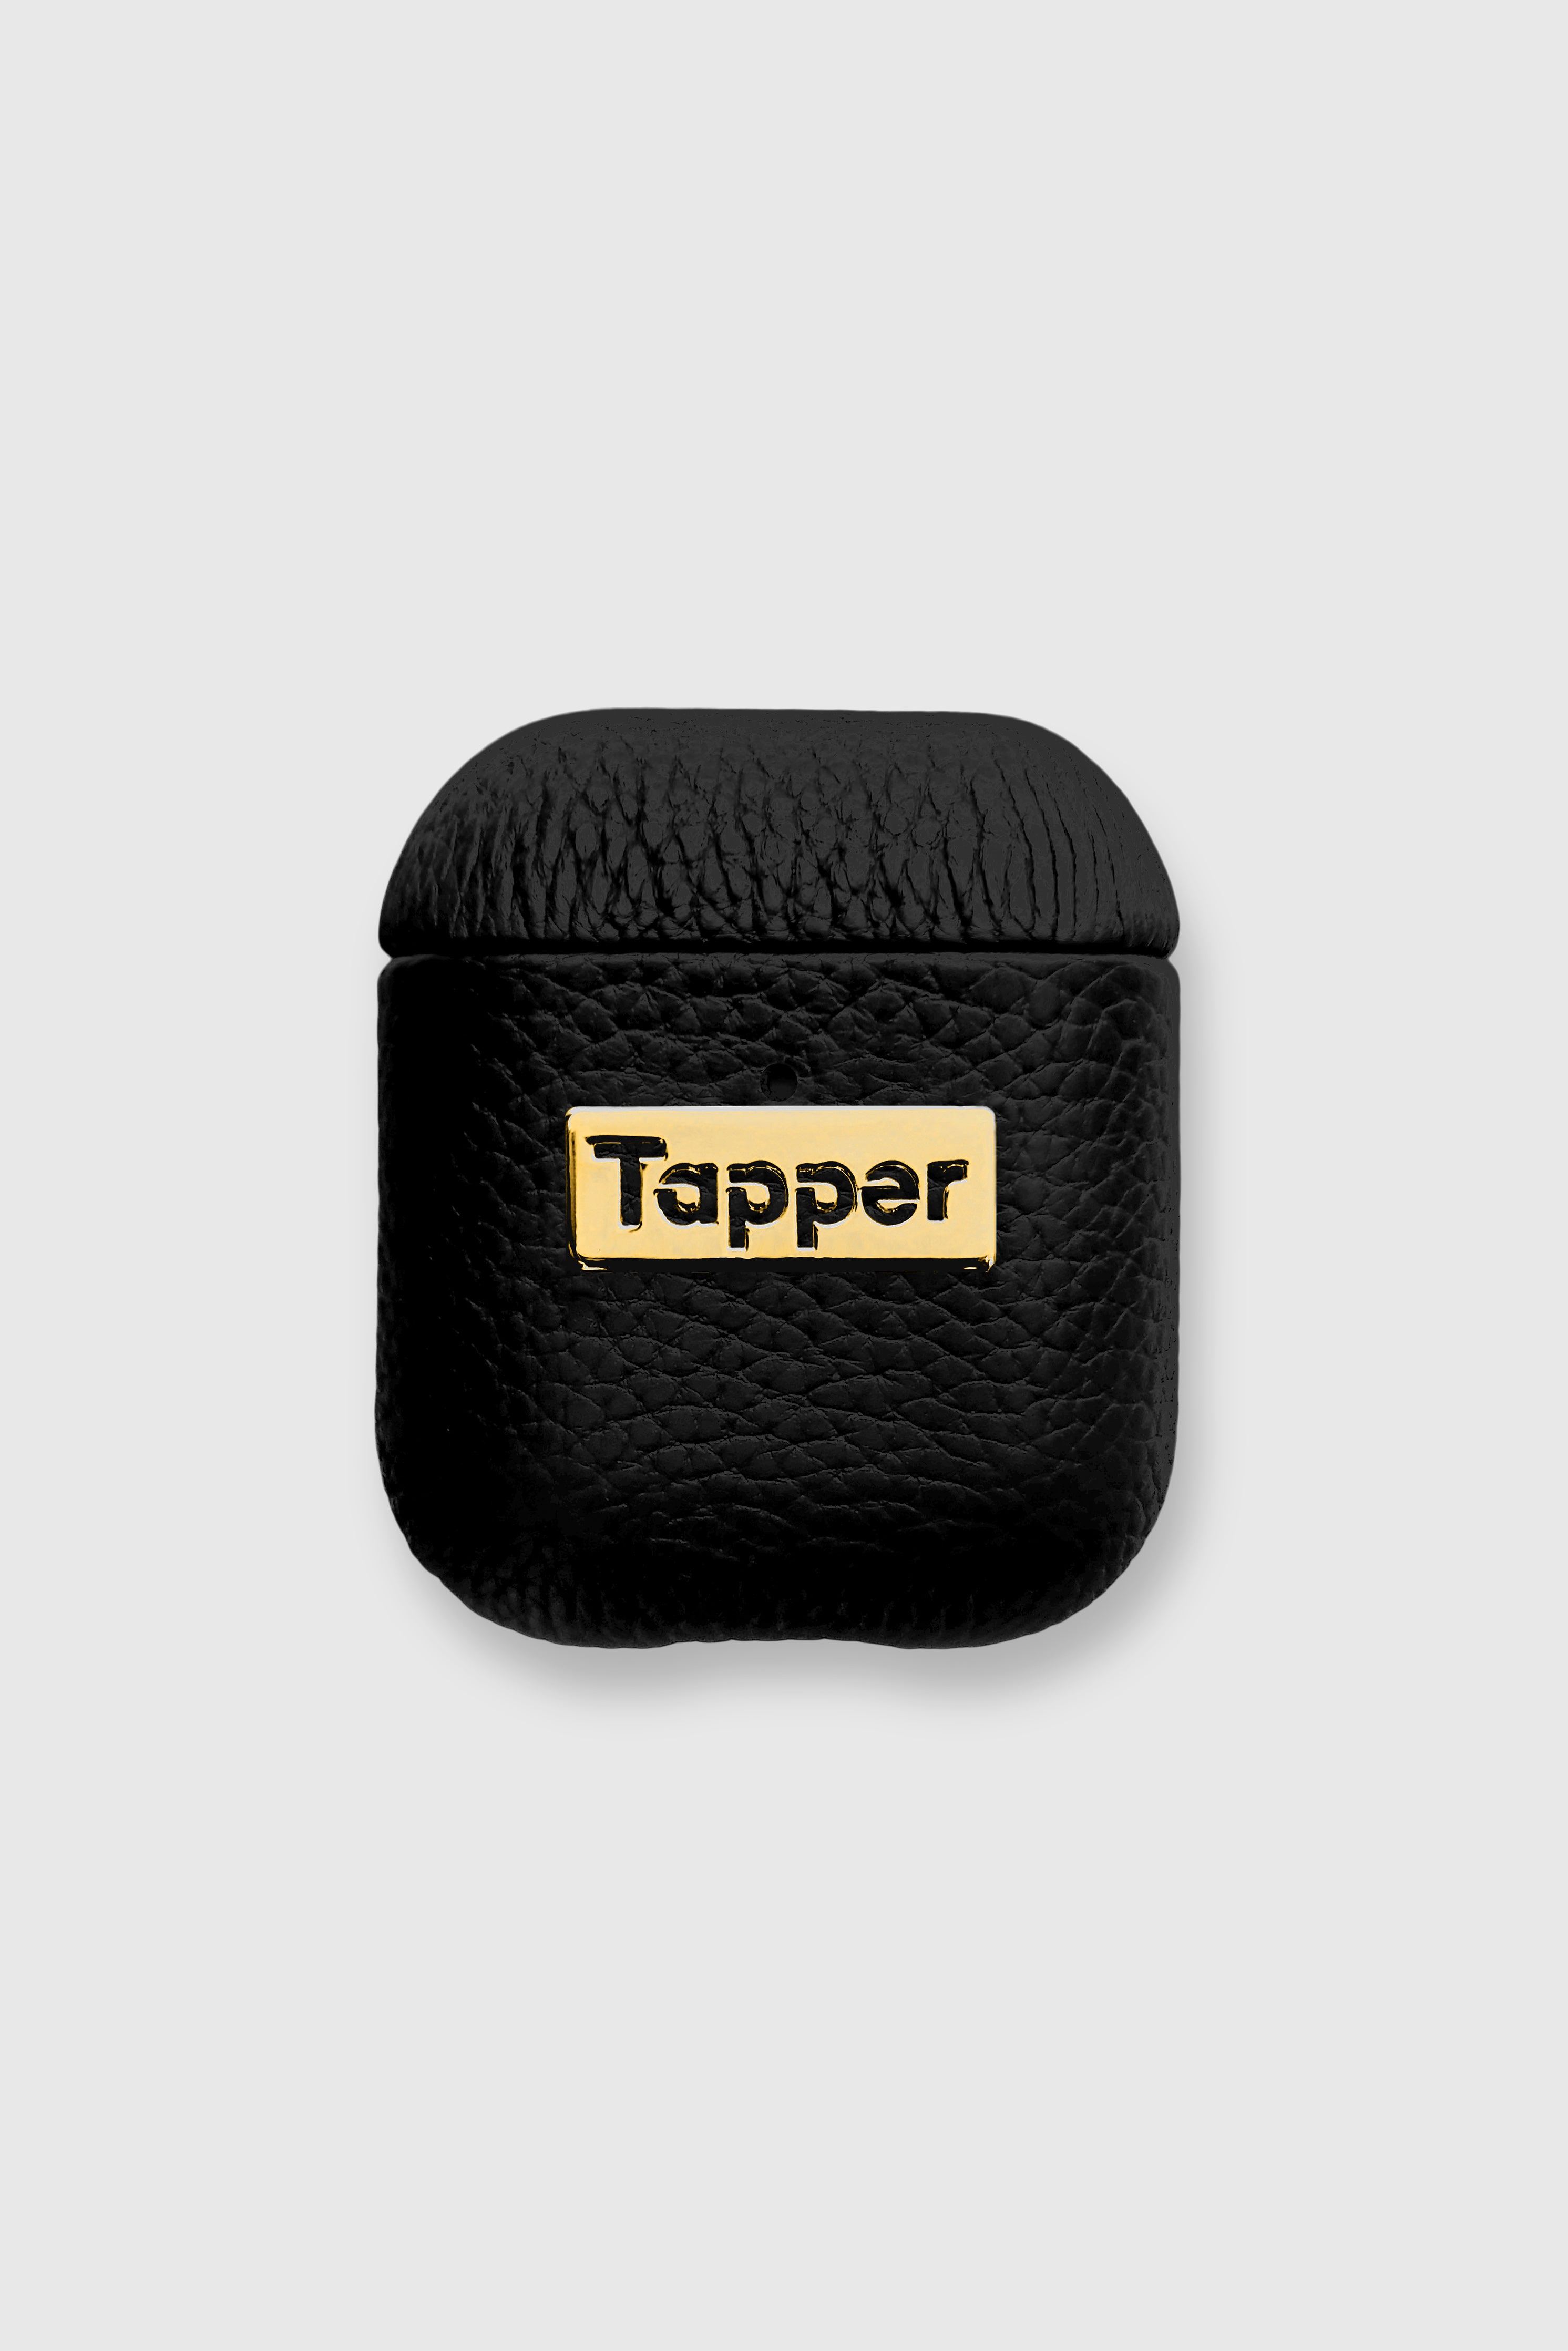 Tapper Luxe Leather Case for (1st and 2nd generation) / 18K Gold plated logo. Designed in Sweden.